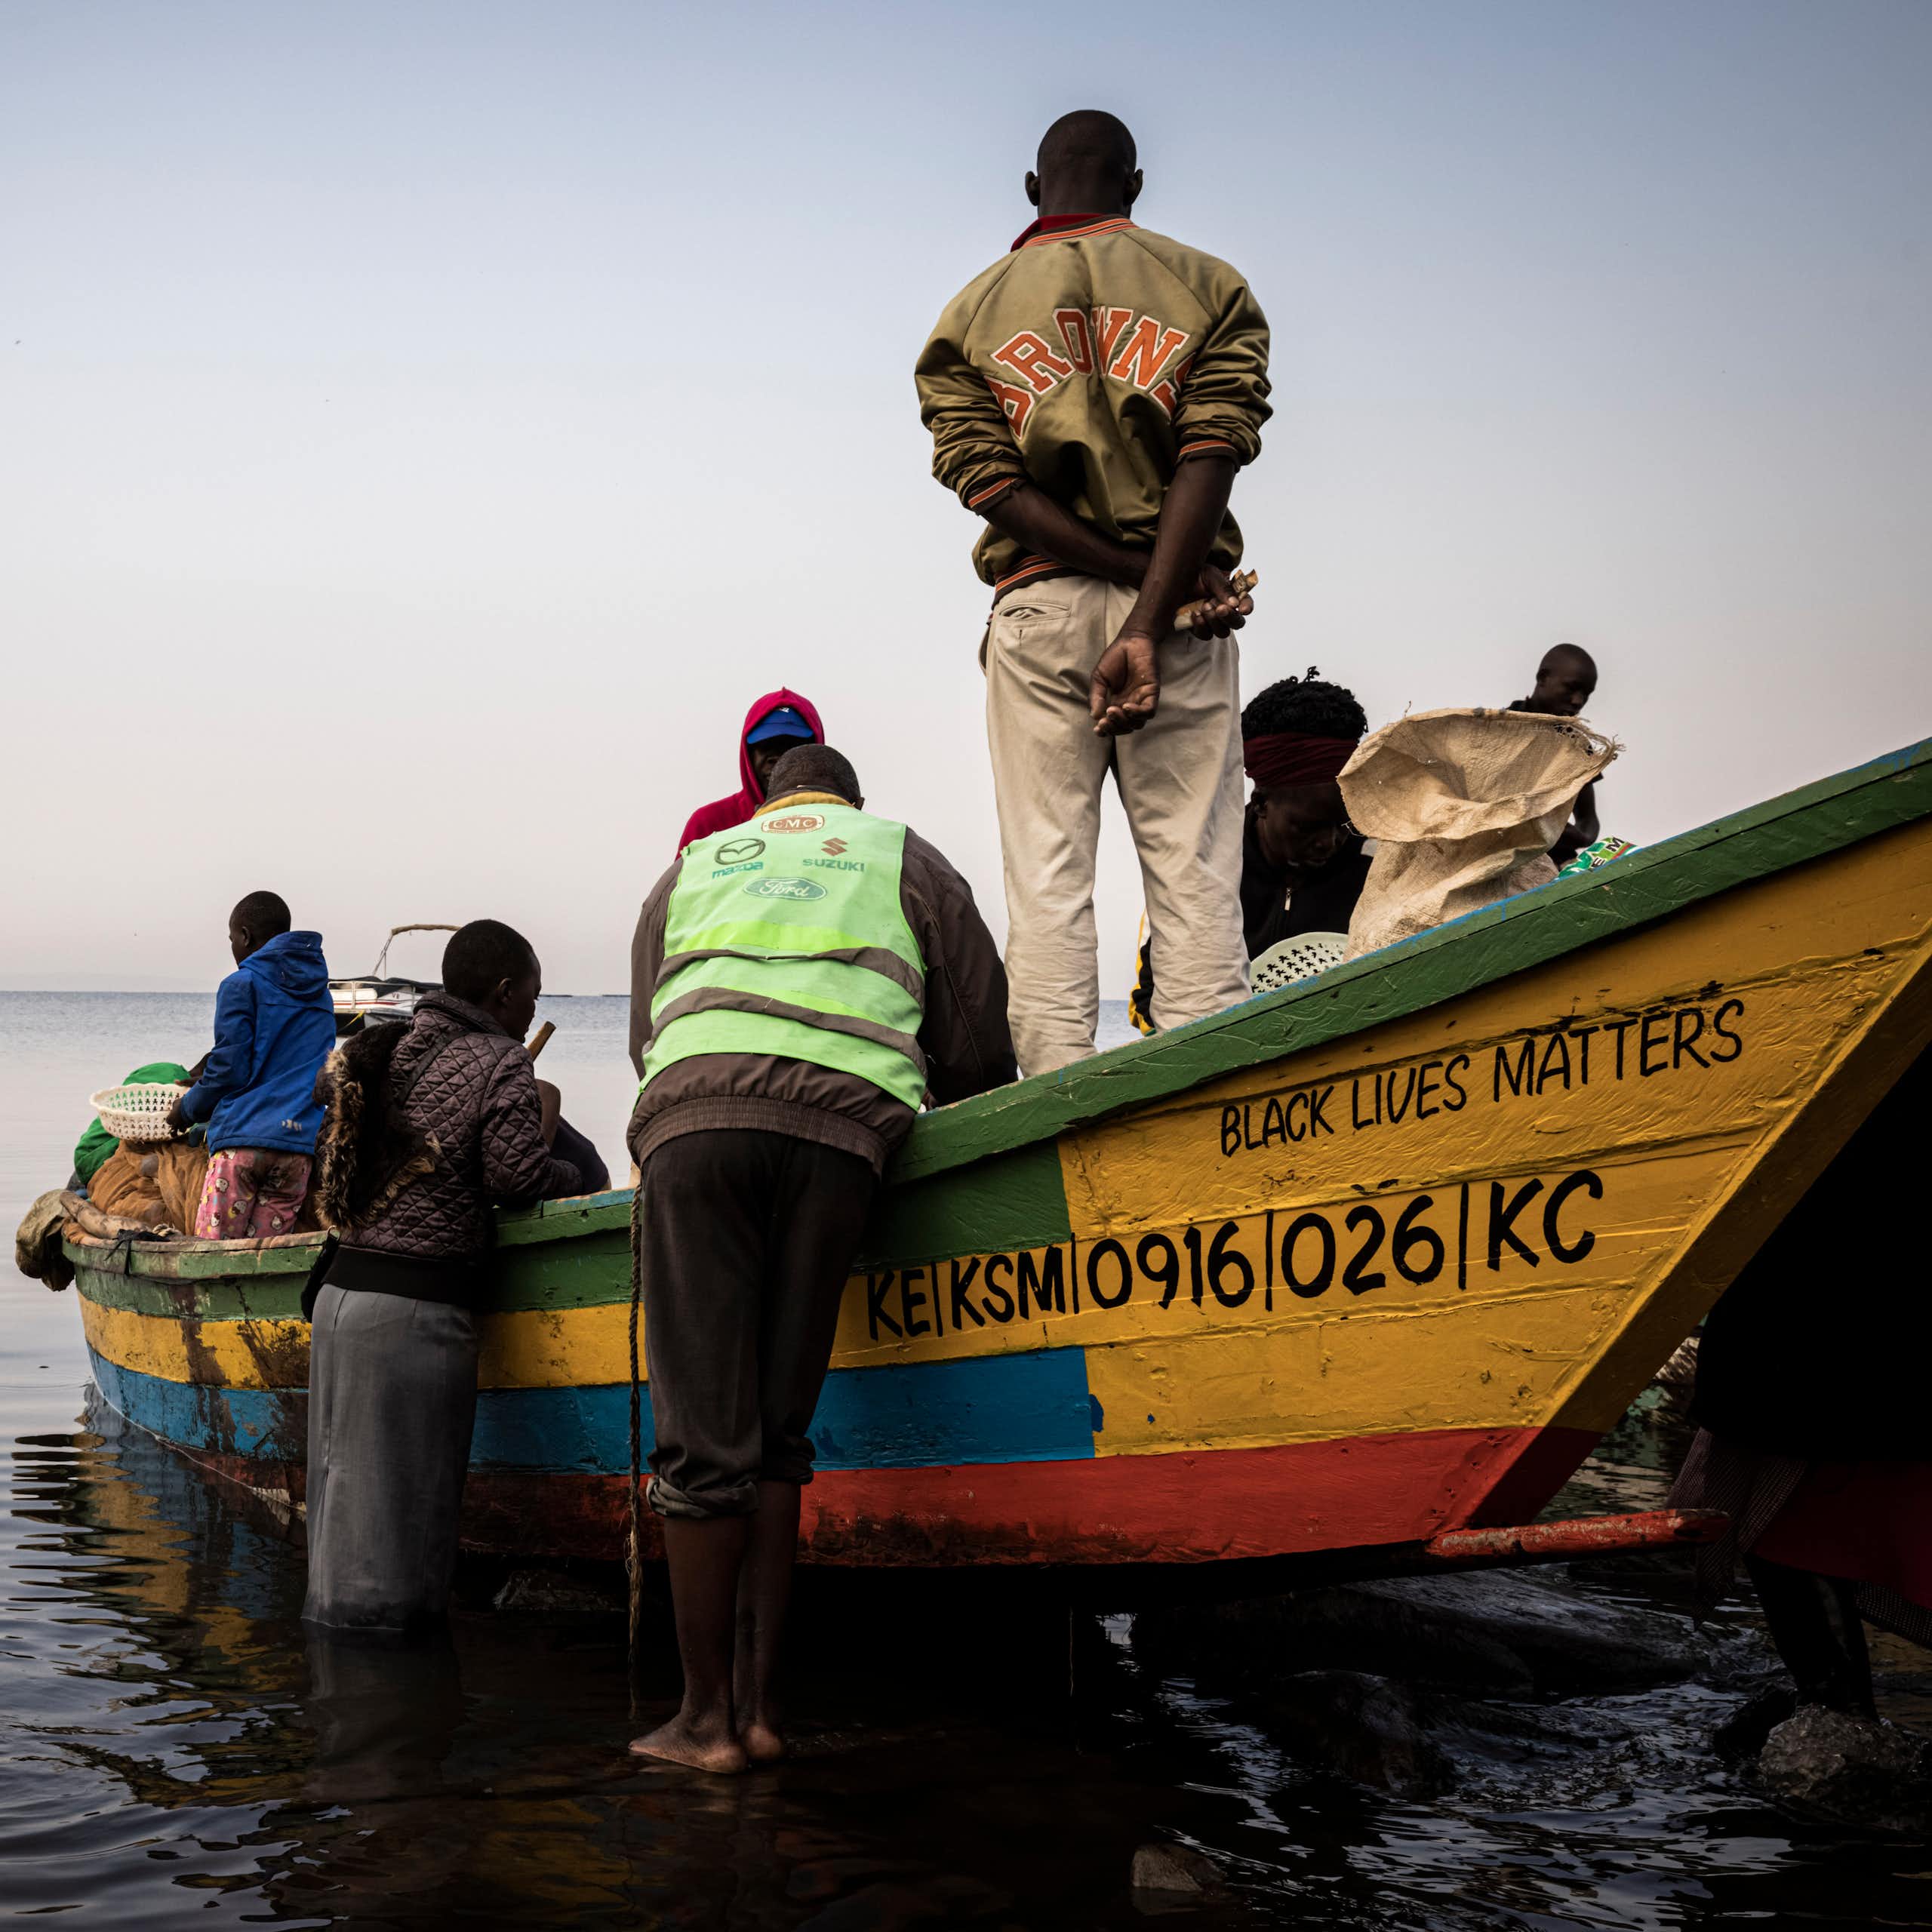 A wooden fishing boat with the words 'Black Lives Matter' on the side and six fisher folk standing in and around it. A woman carries a plastic bucket of fish away from the boat